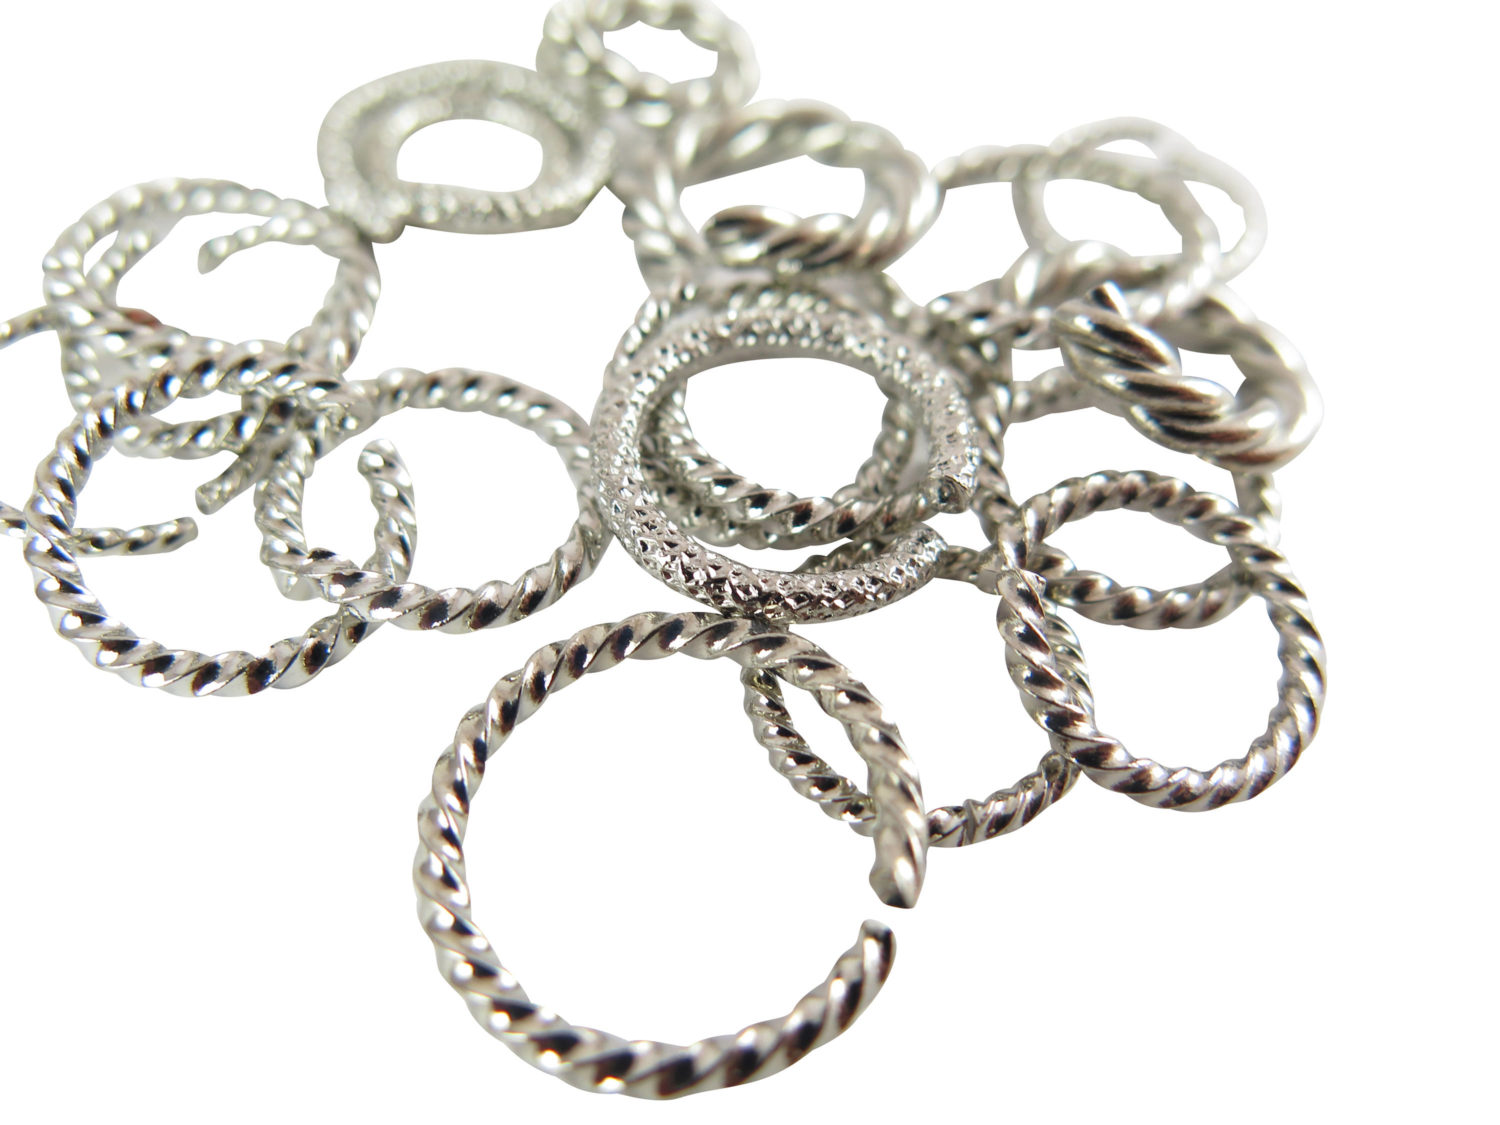 Heavy Duty Textured Stainless Steel Jump Rings